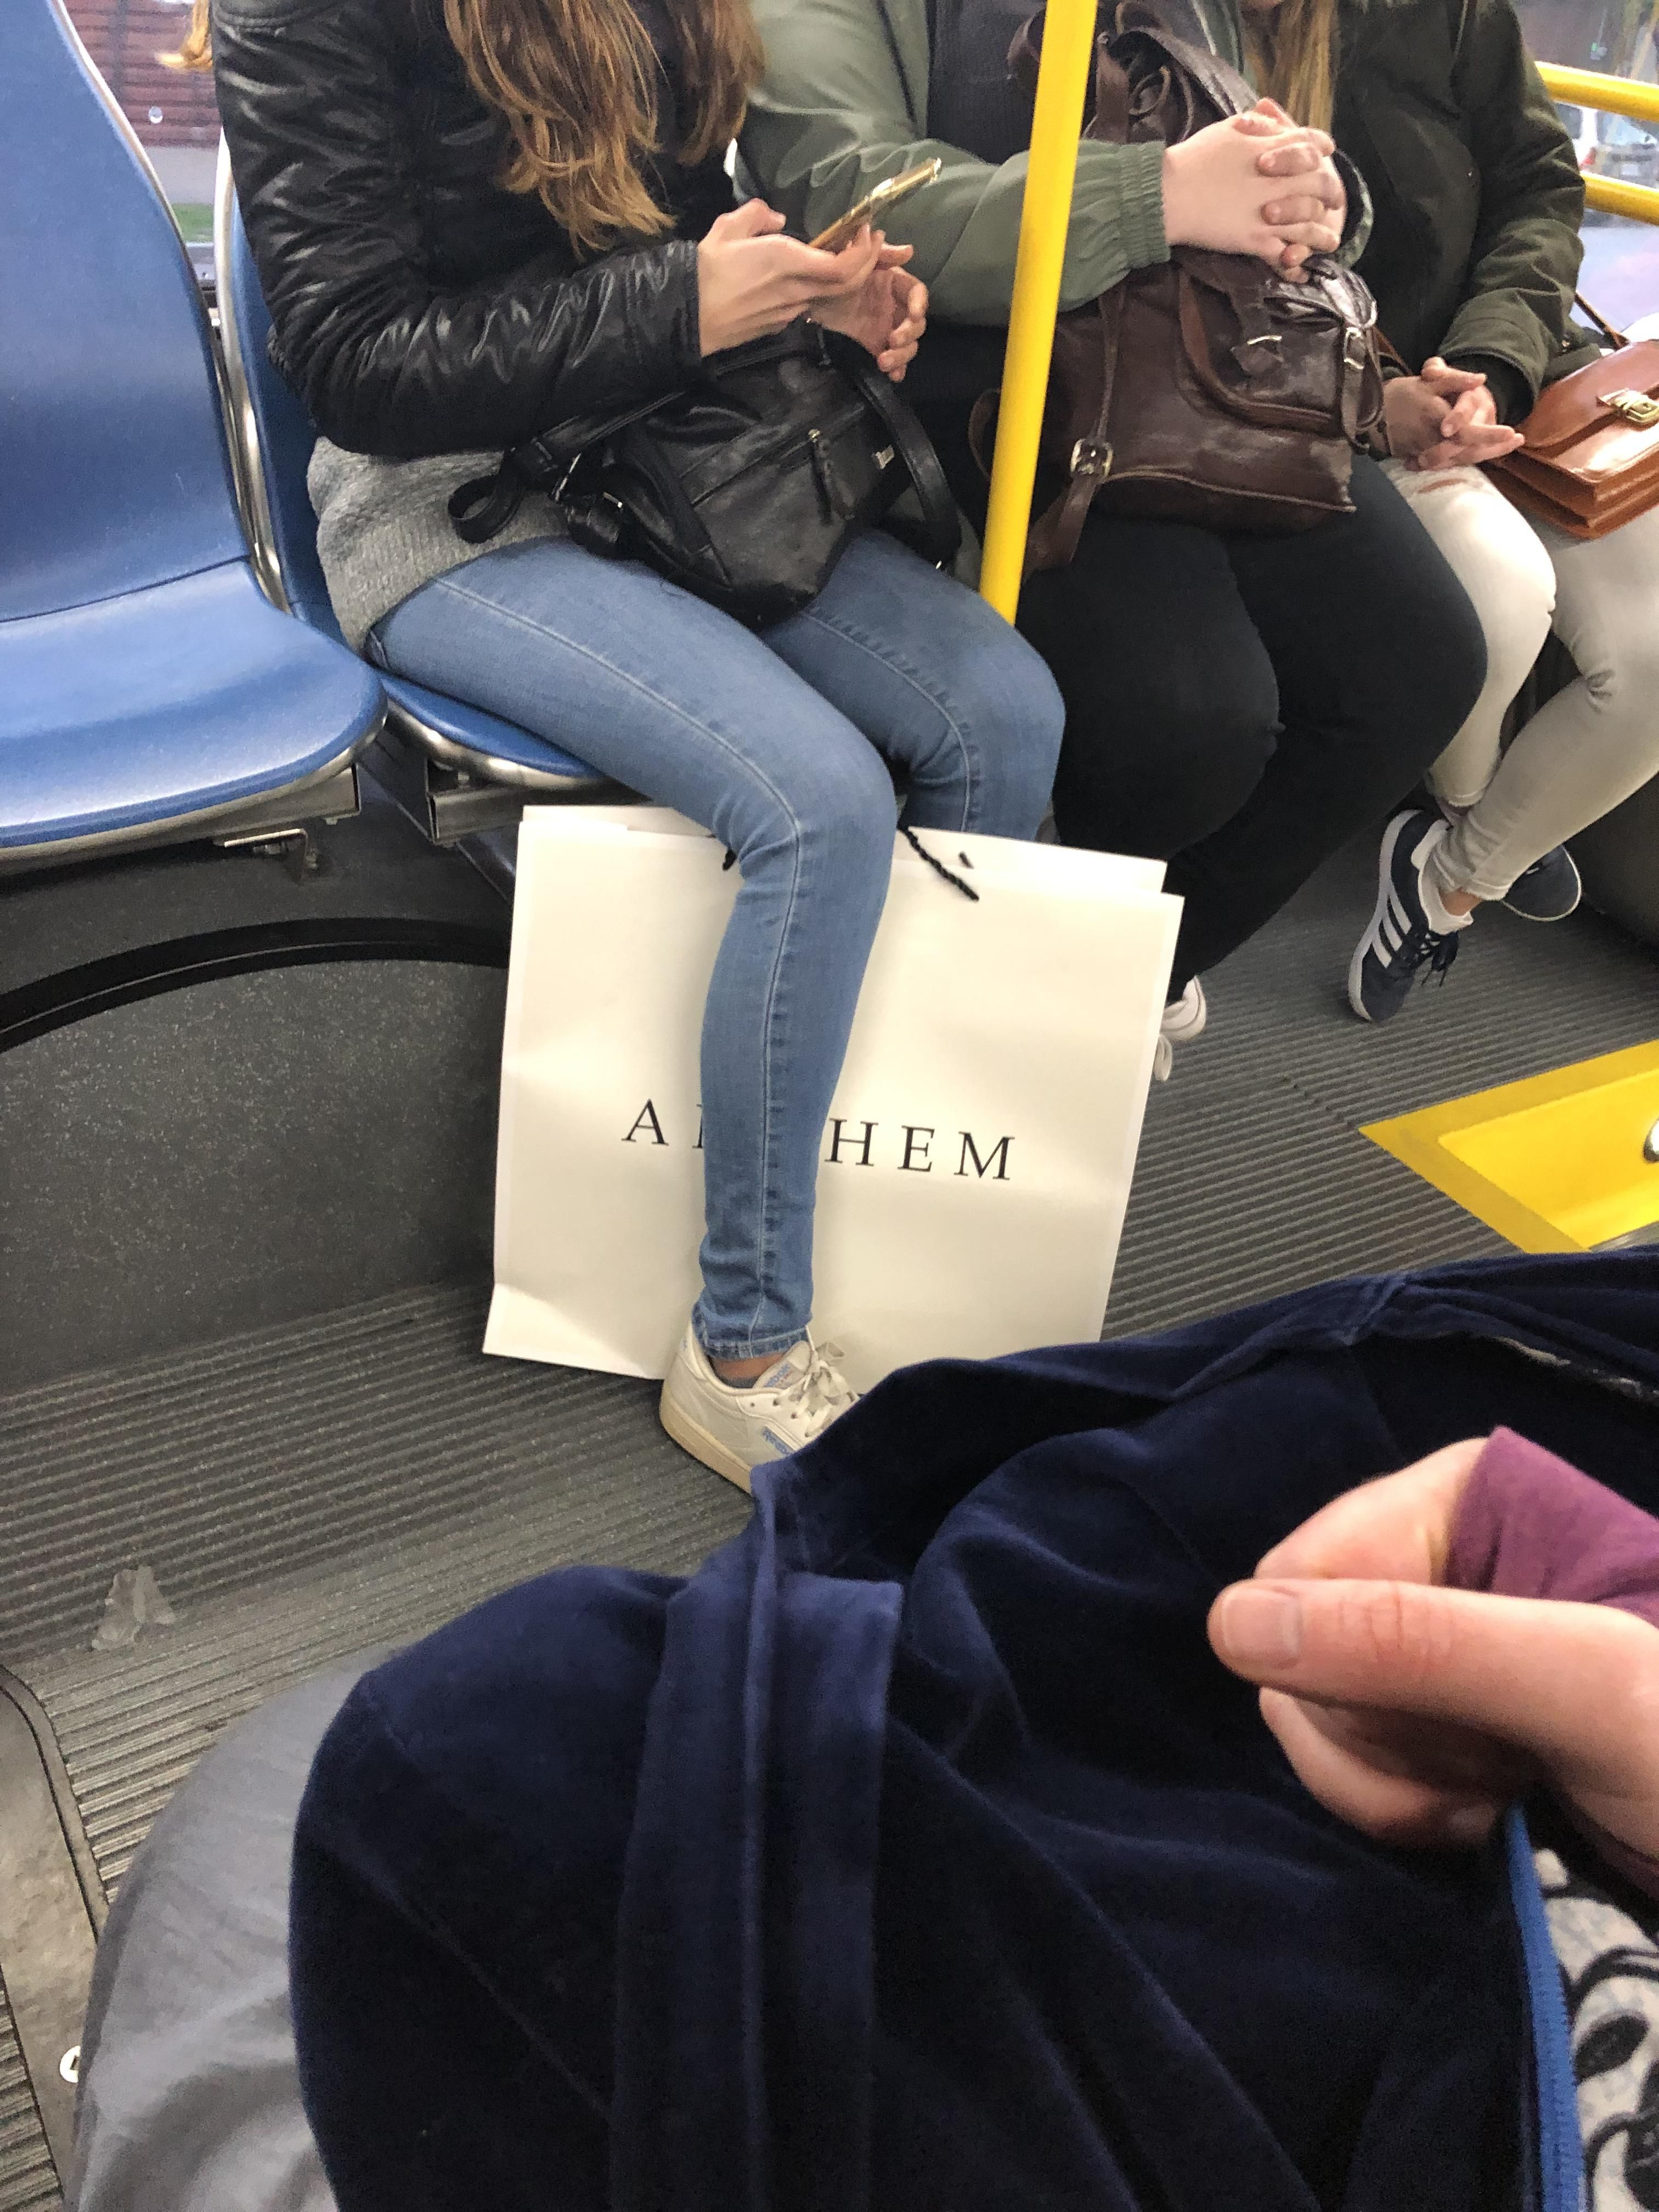 This bag on the bus was low-key trying to get my attention